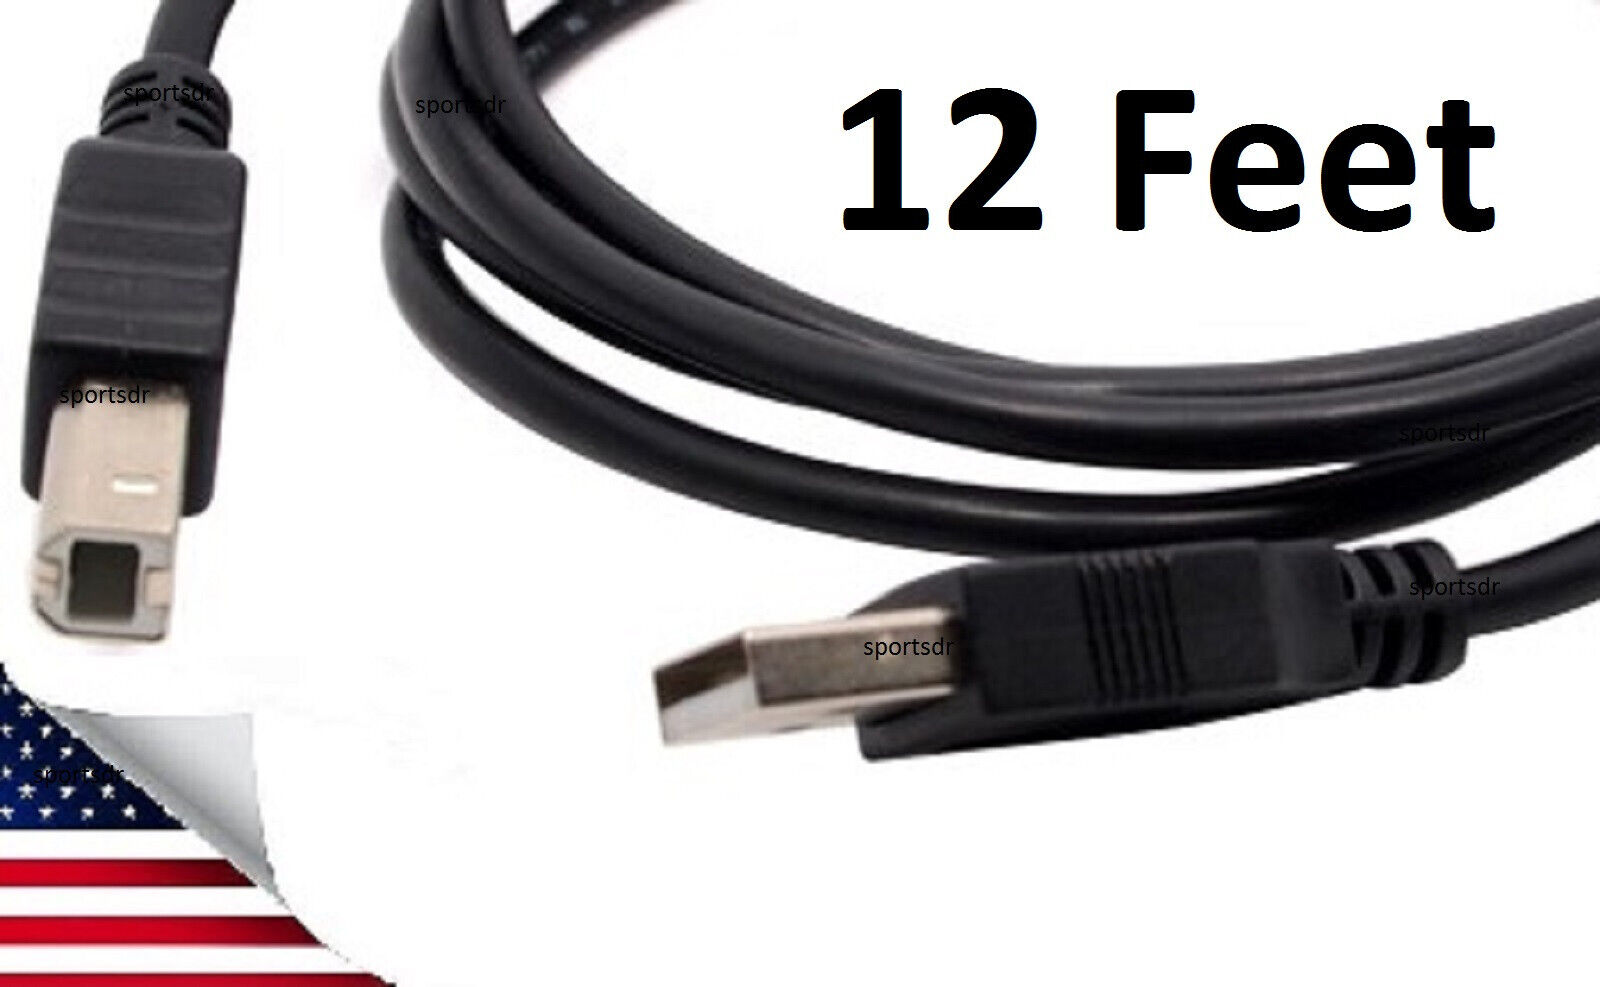 USB Cord Data Cable for Focusrite Scarlett 2i2 2i4 1st 2nd Gen Audio Interface